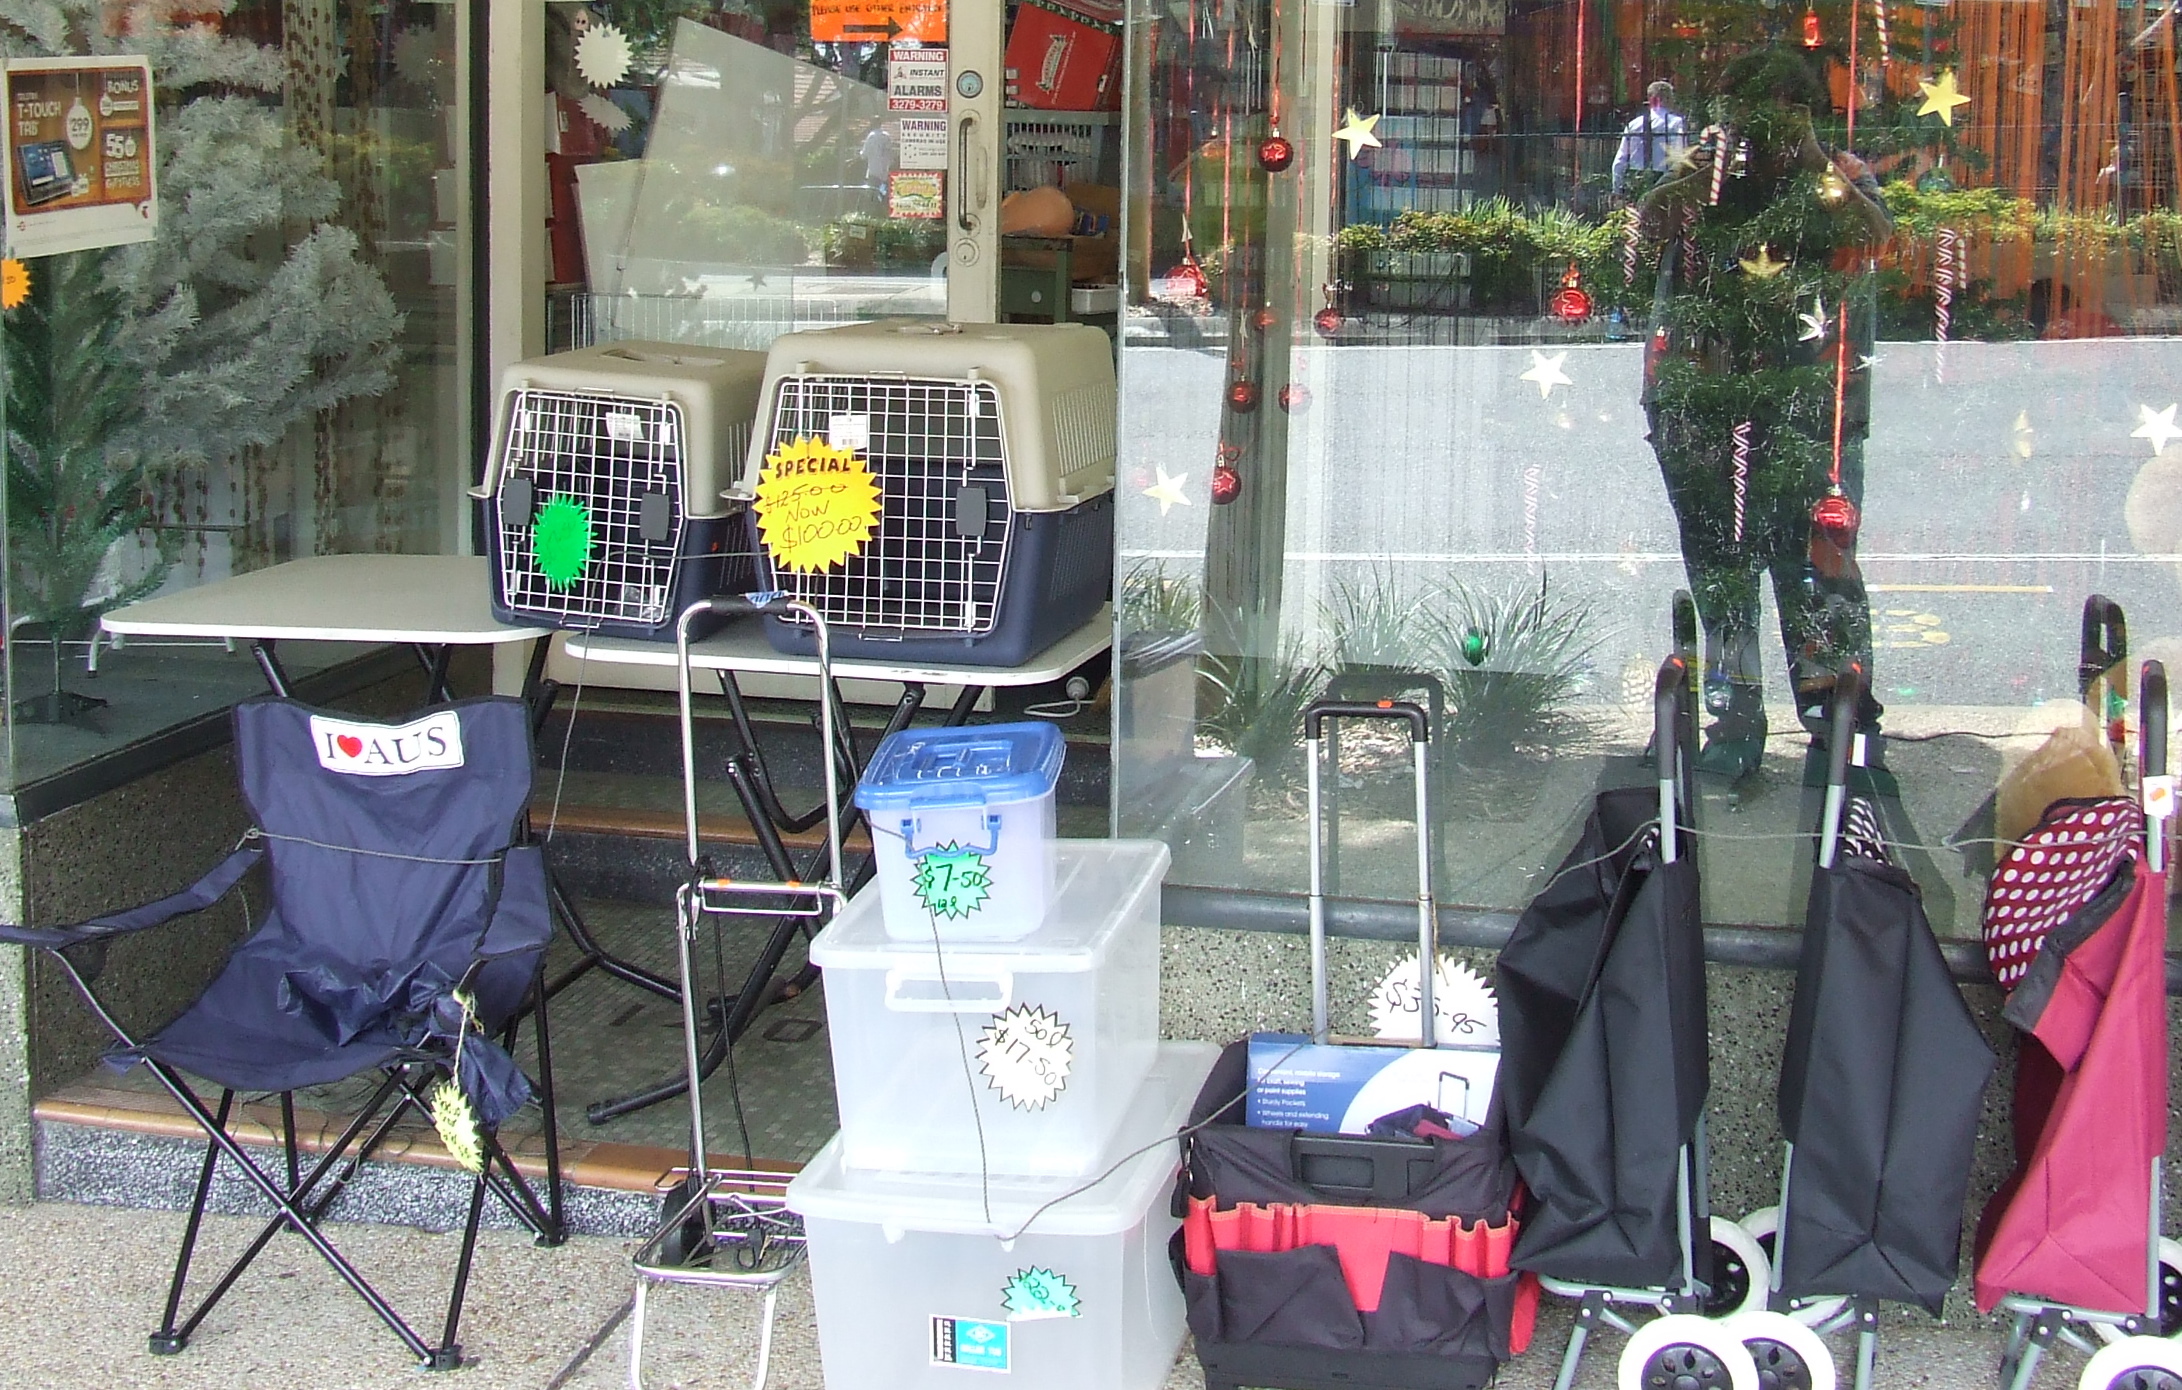 luggage in front of a store with baskets, umbrellas and other supplies on the front